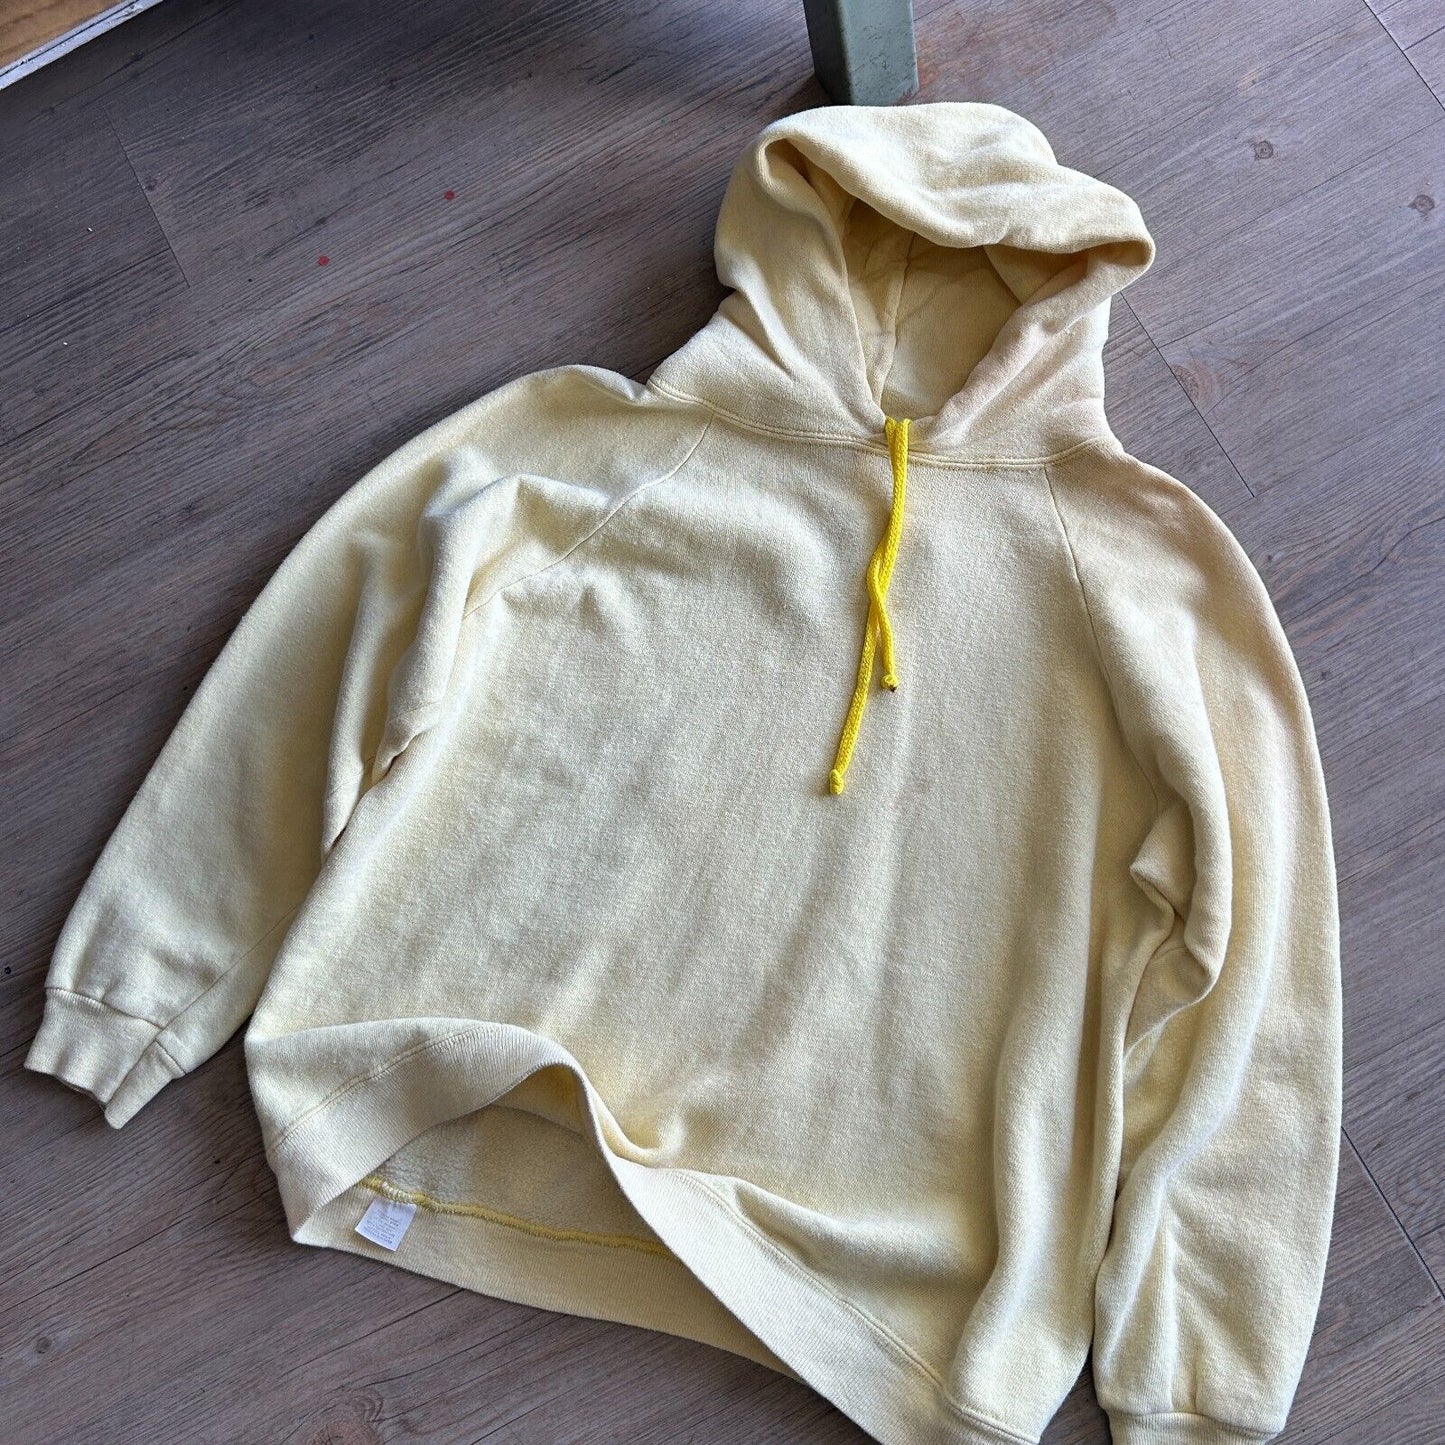 VINTAGE 60s 70s | Light Yellow Faded Blank Hoodie Sweater sz S Adult